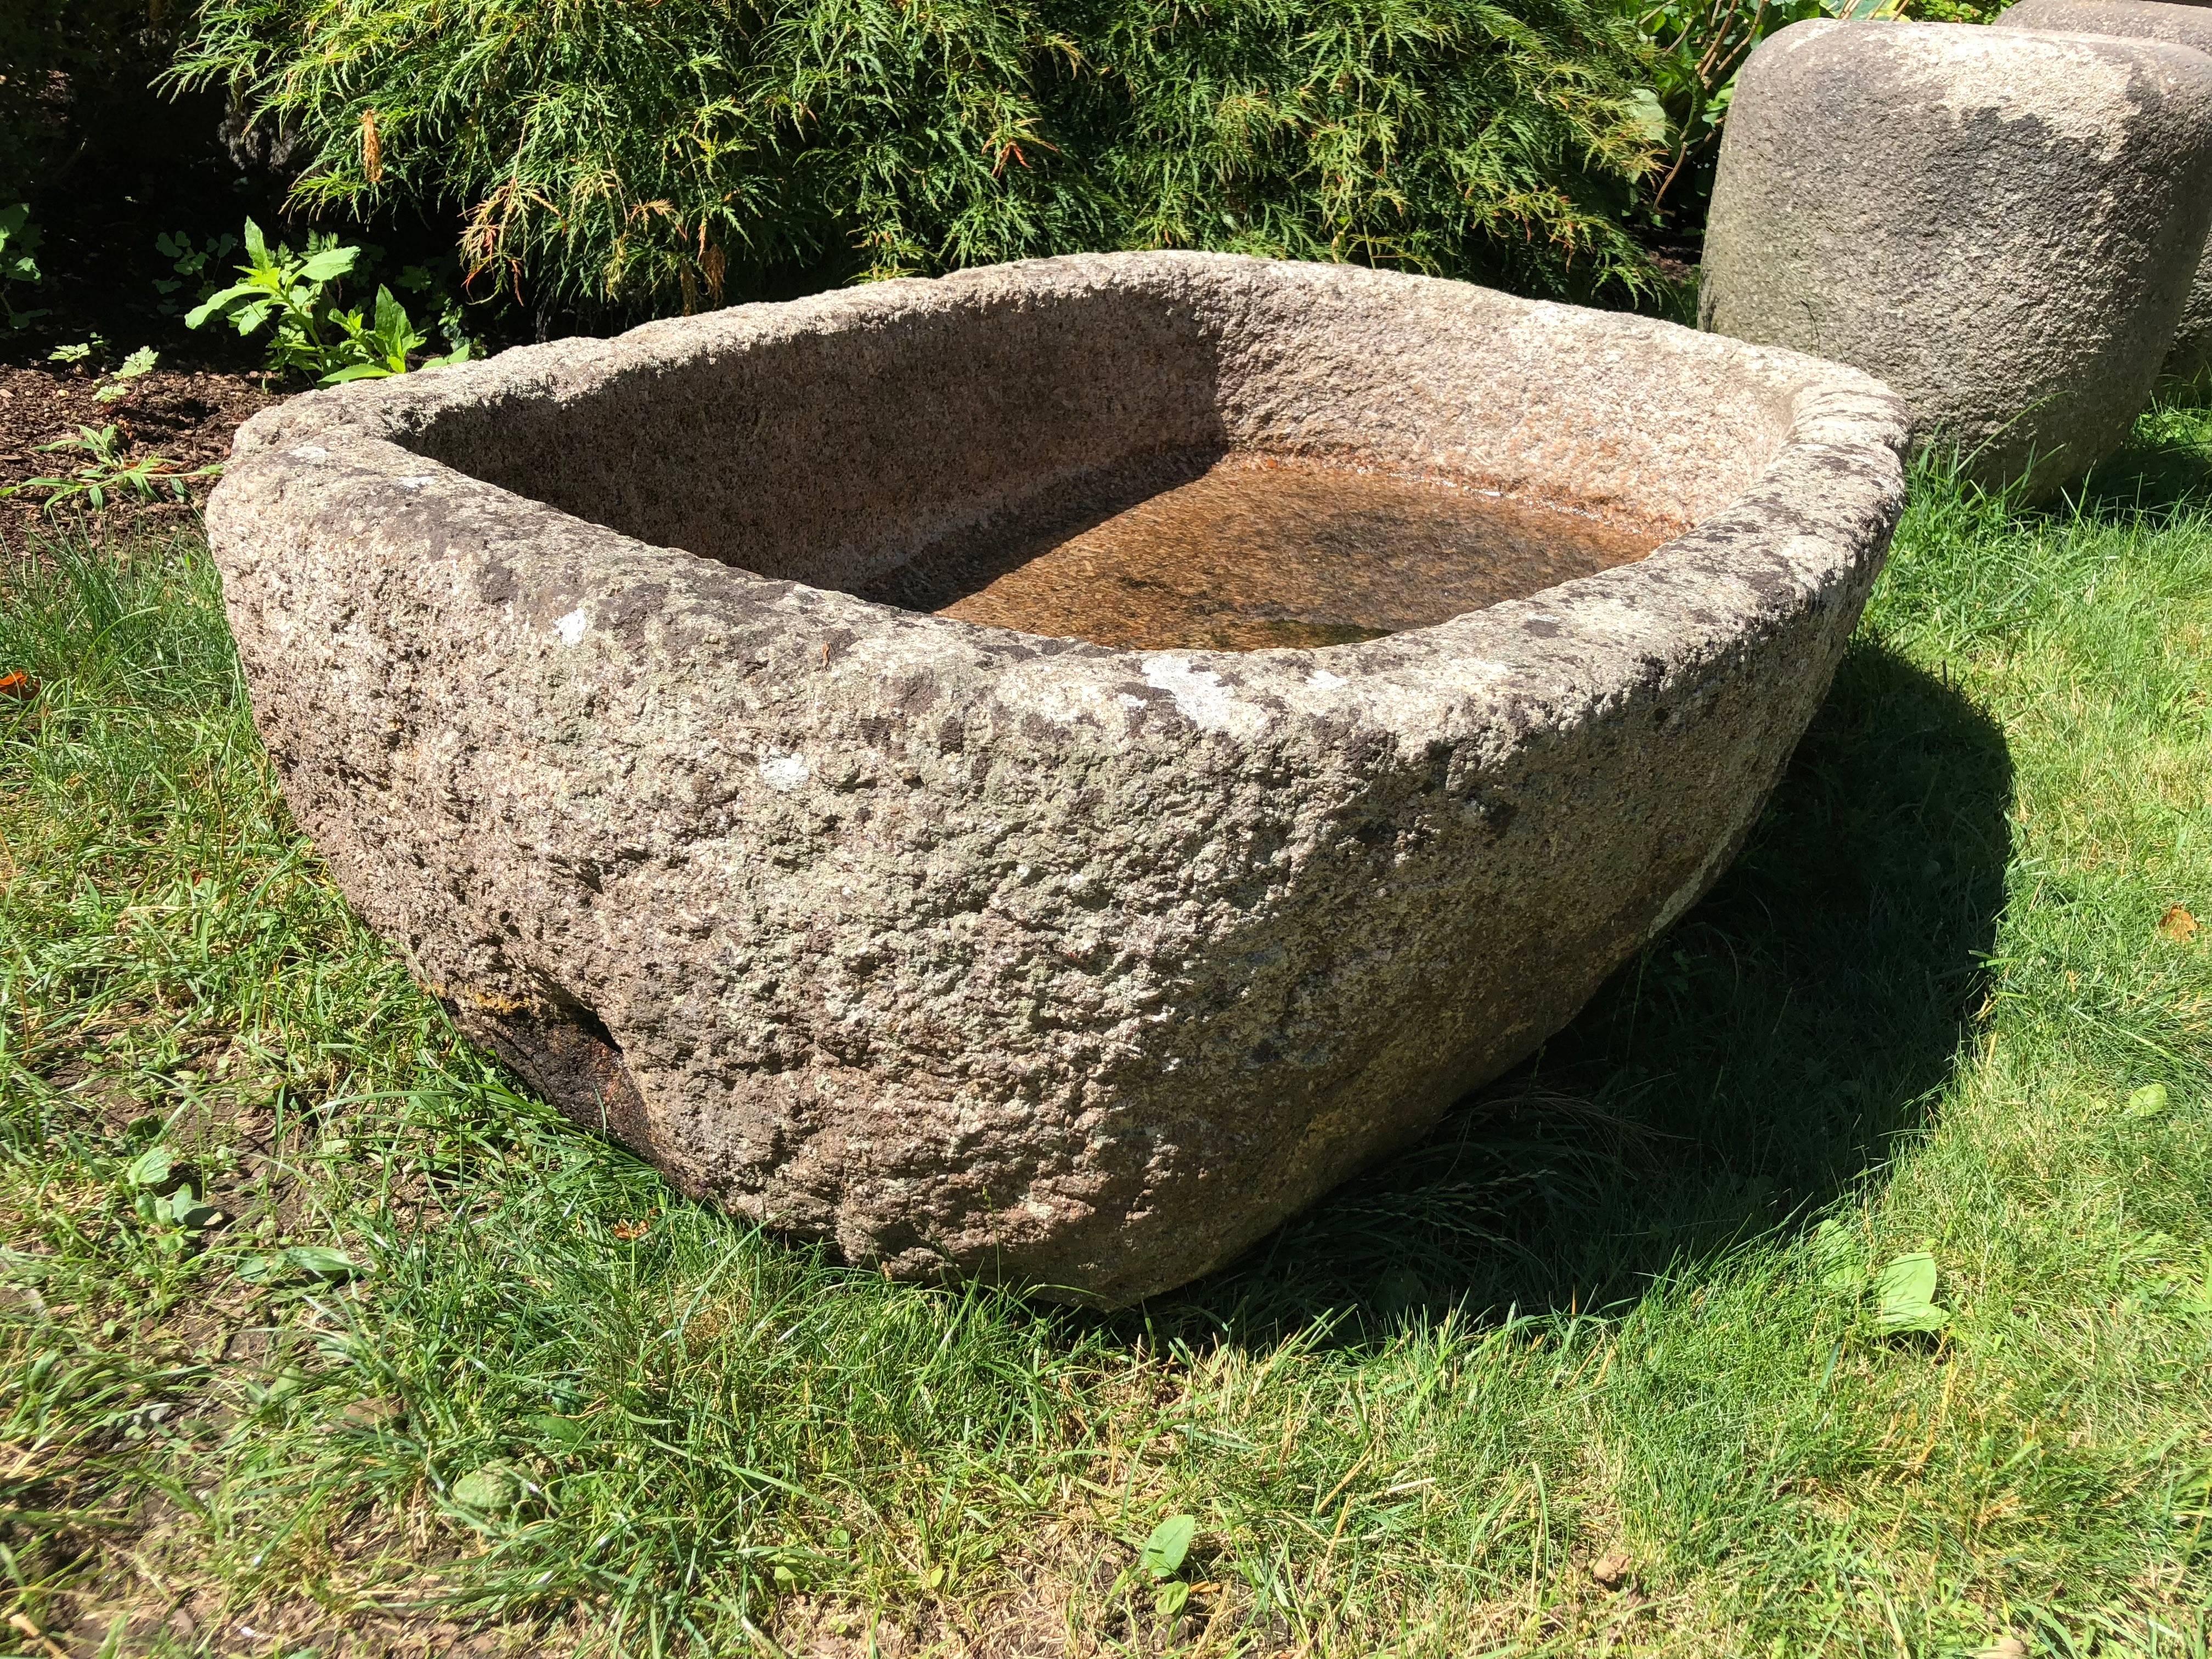 We so love granite from Cornwall and we were lucky enough to score two gorgeous troughs on our last buying trip. This one is the larger of the two and featured a nearly oval shape with beautifully-rounded corners and a heavily weathered surface